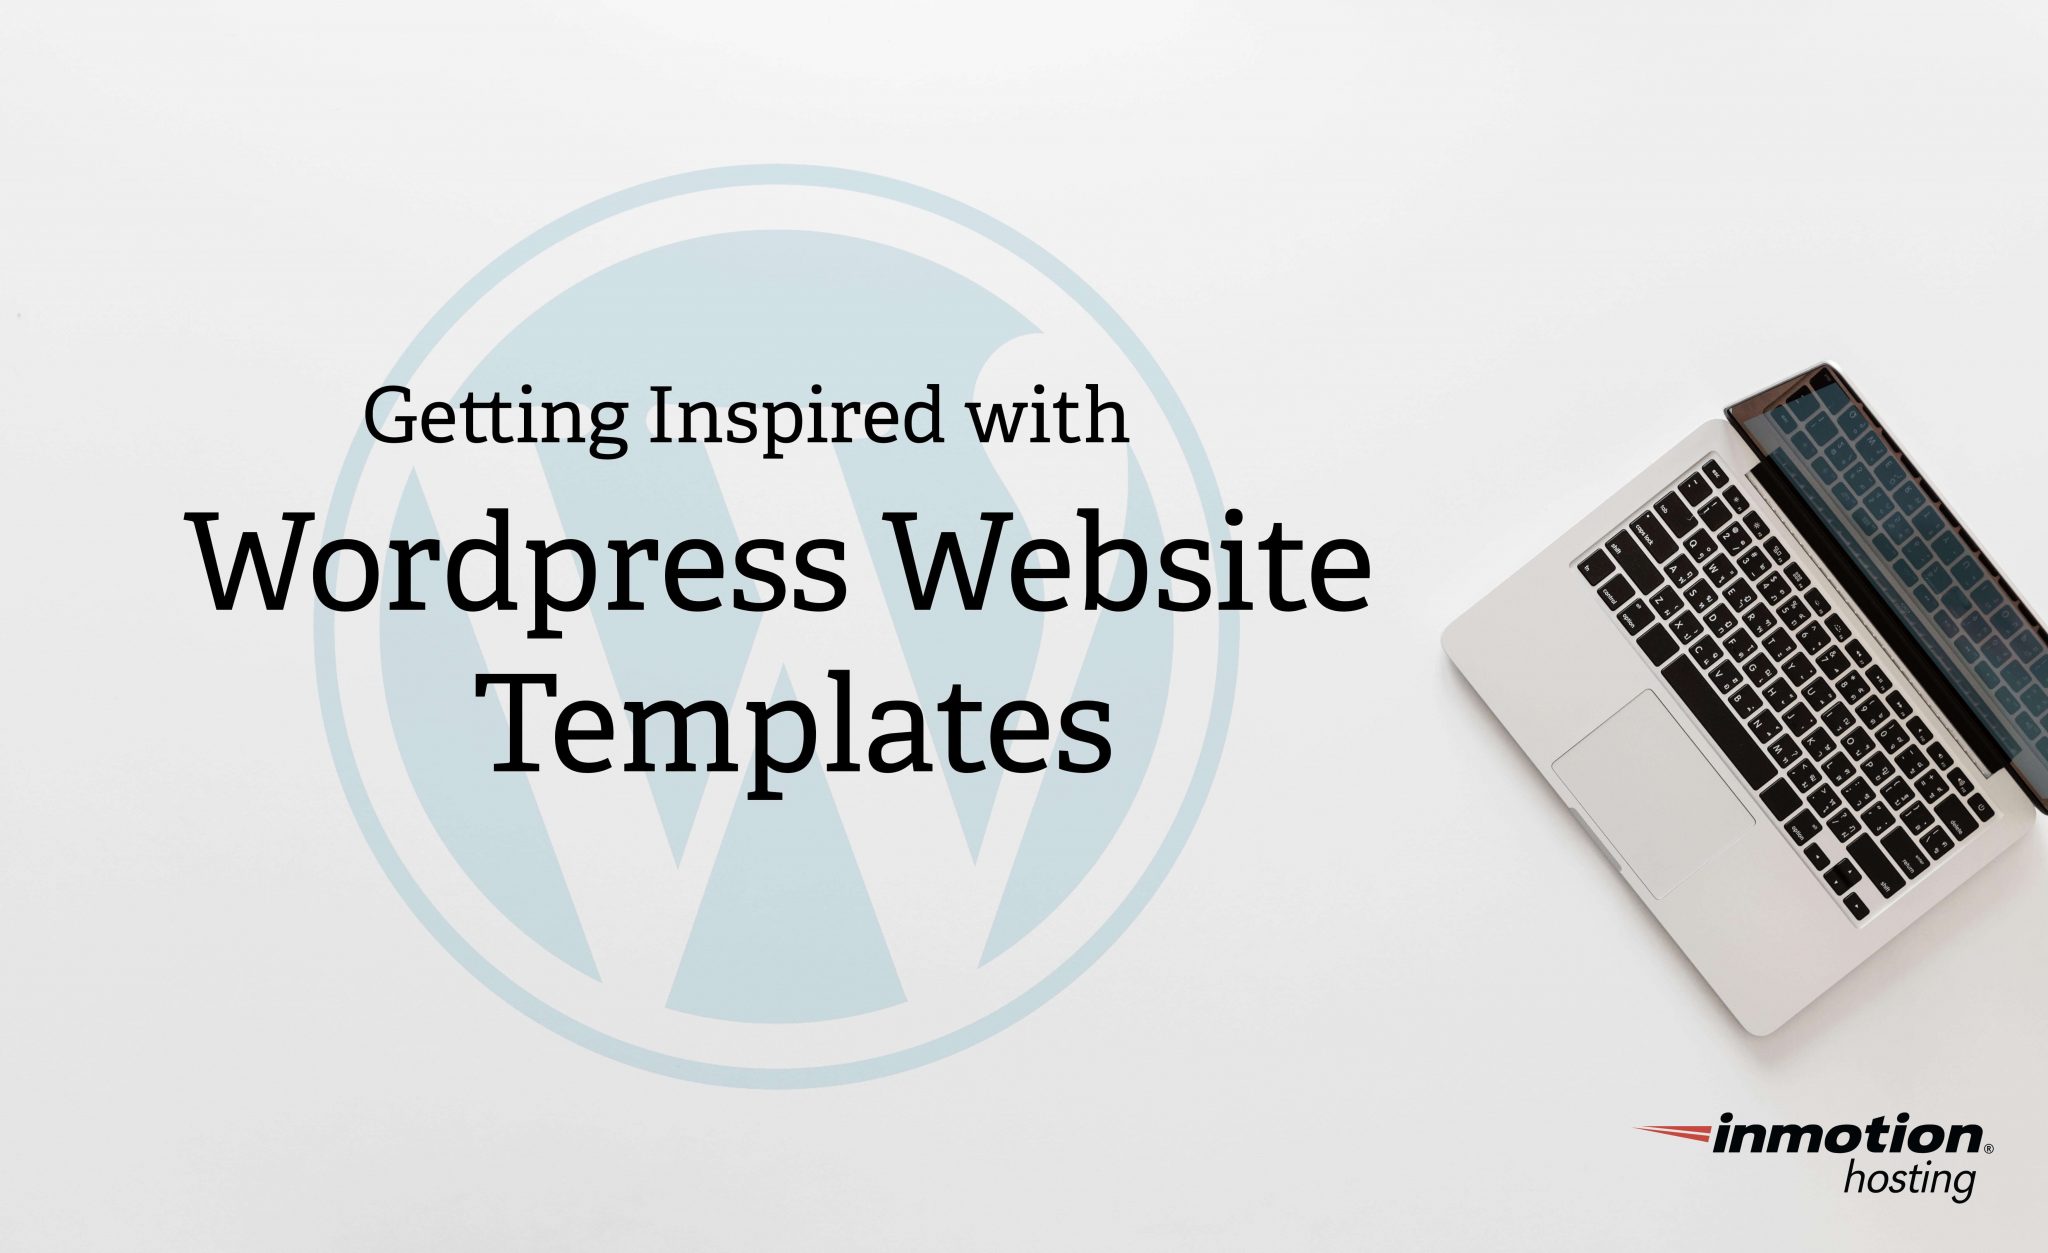 Getting Inspired with WordPress Website Templates